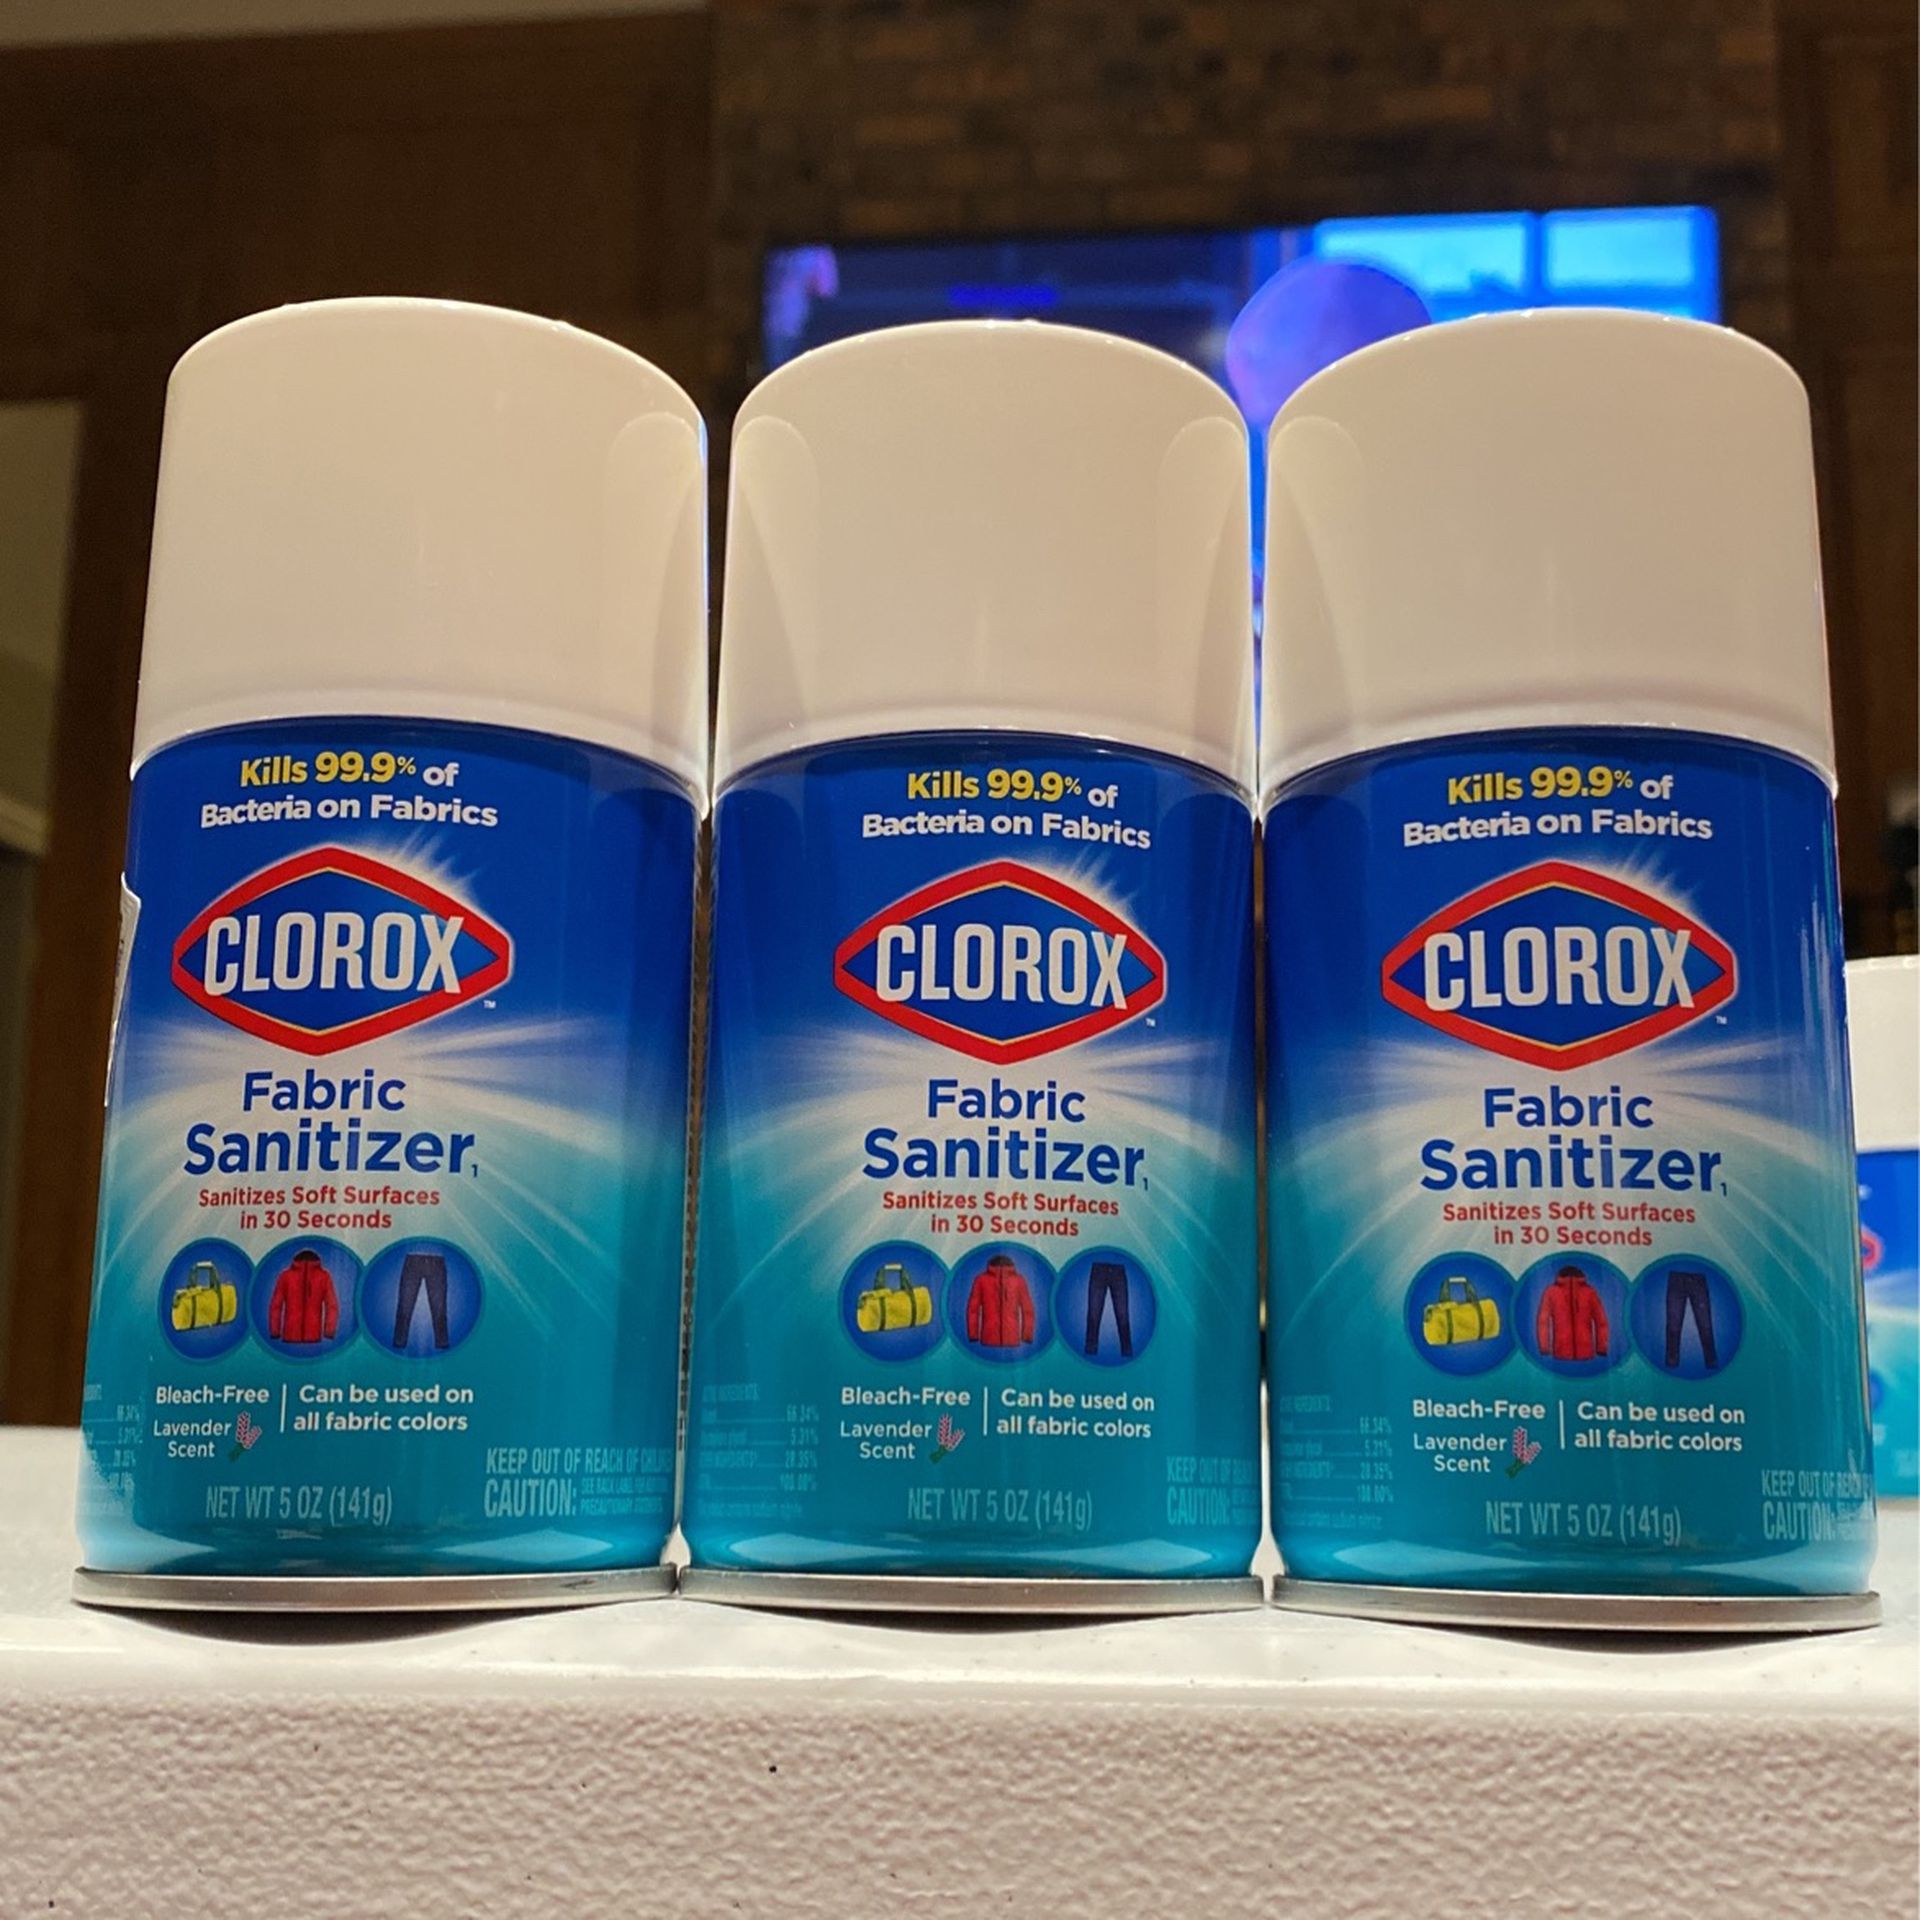 3 Clorox Fabric Sanitize Cleaner Laundry Cans